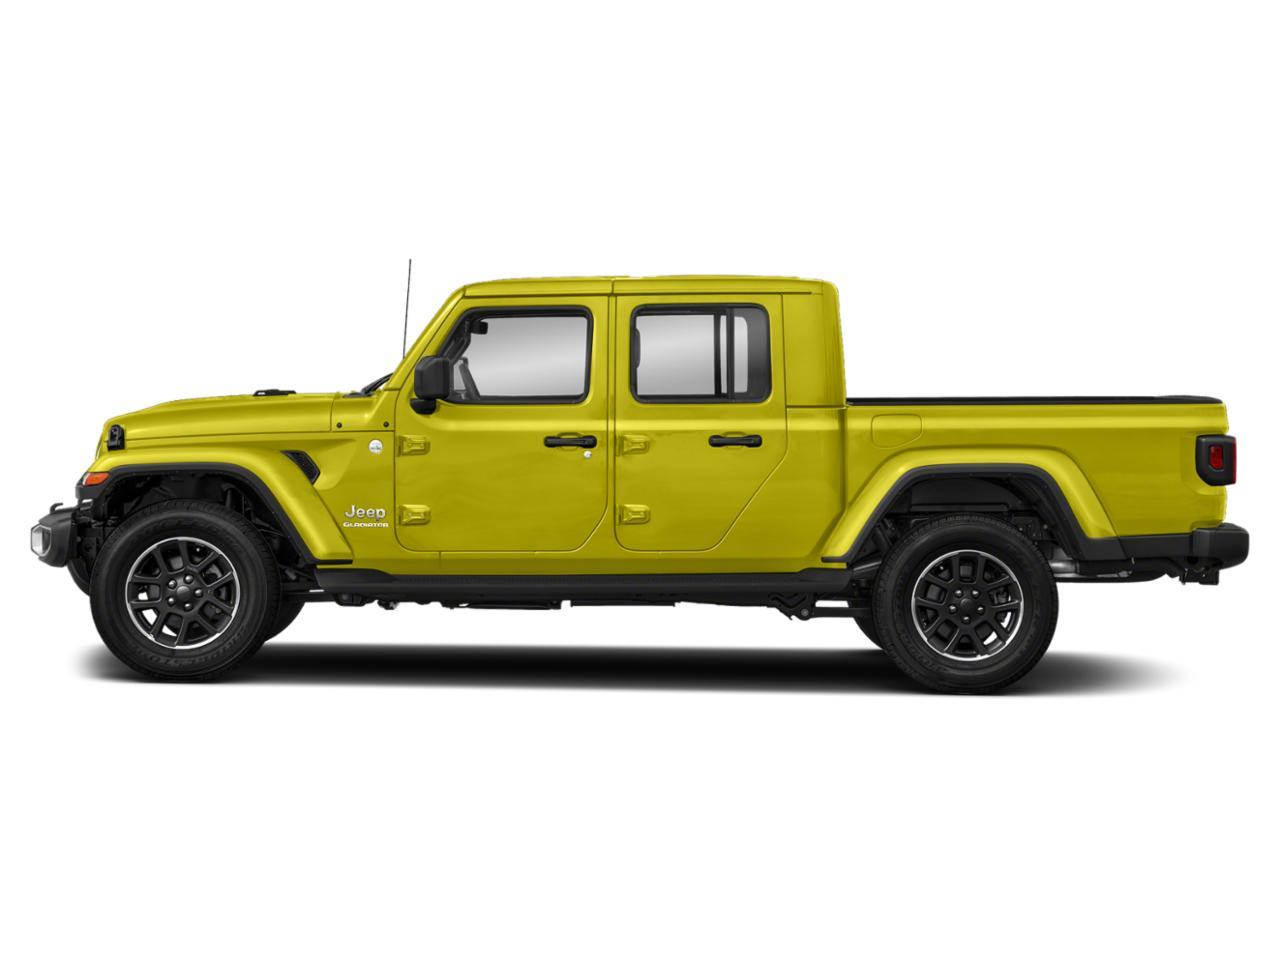 2023 Jeep Gladiator Vehicle Photo in South Hill, VA 23970